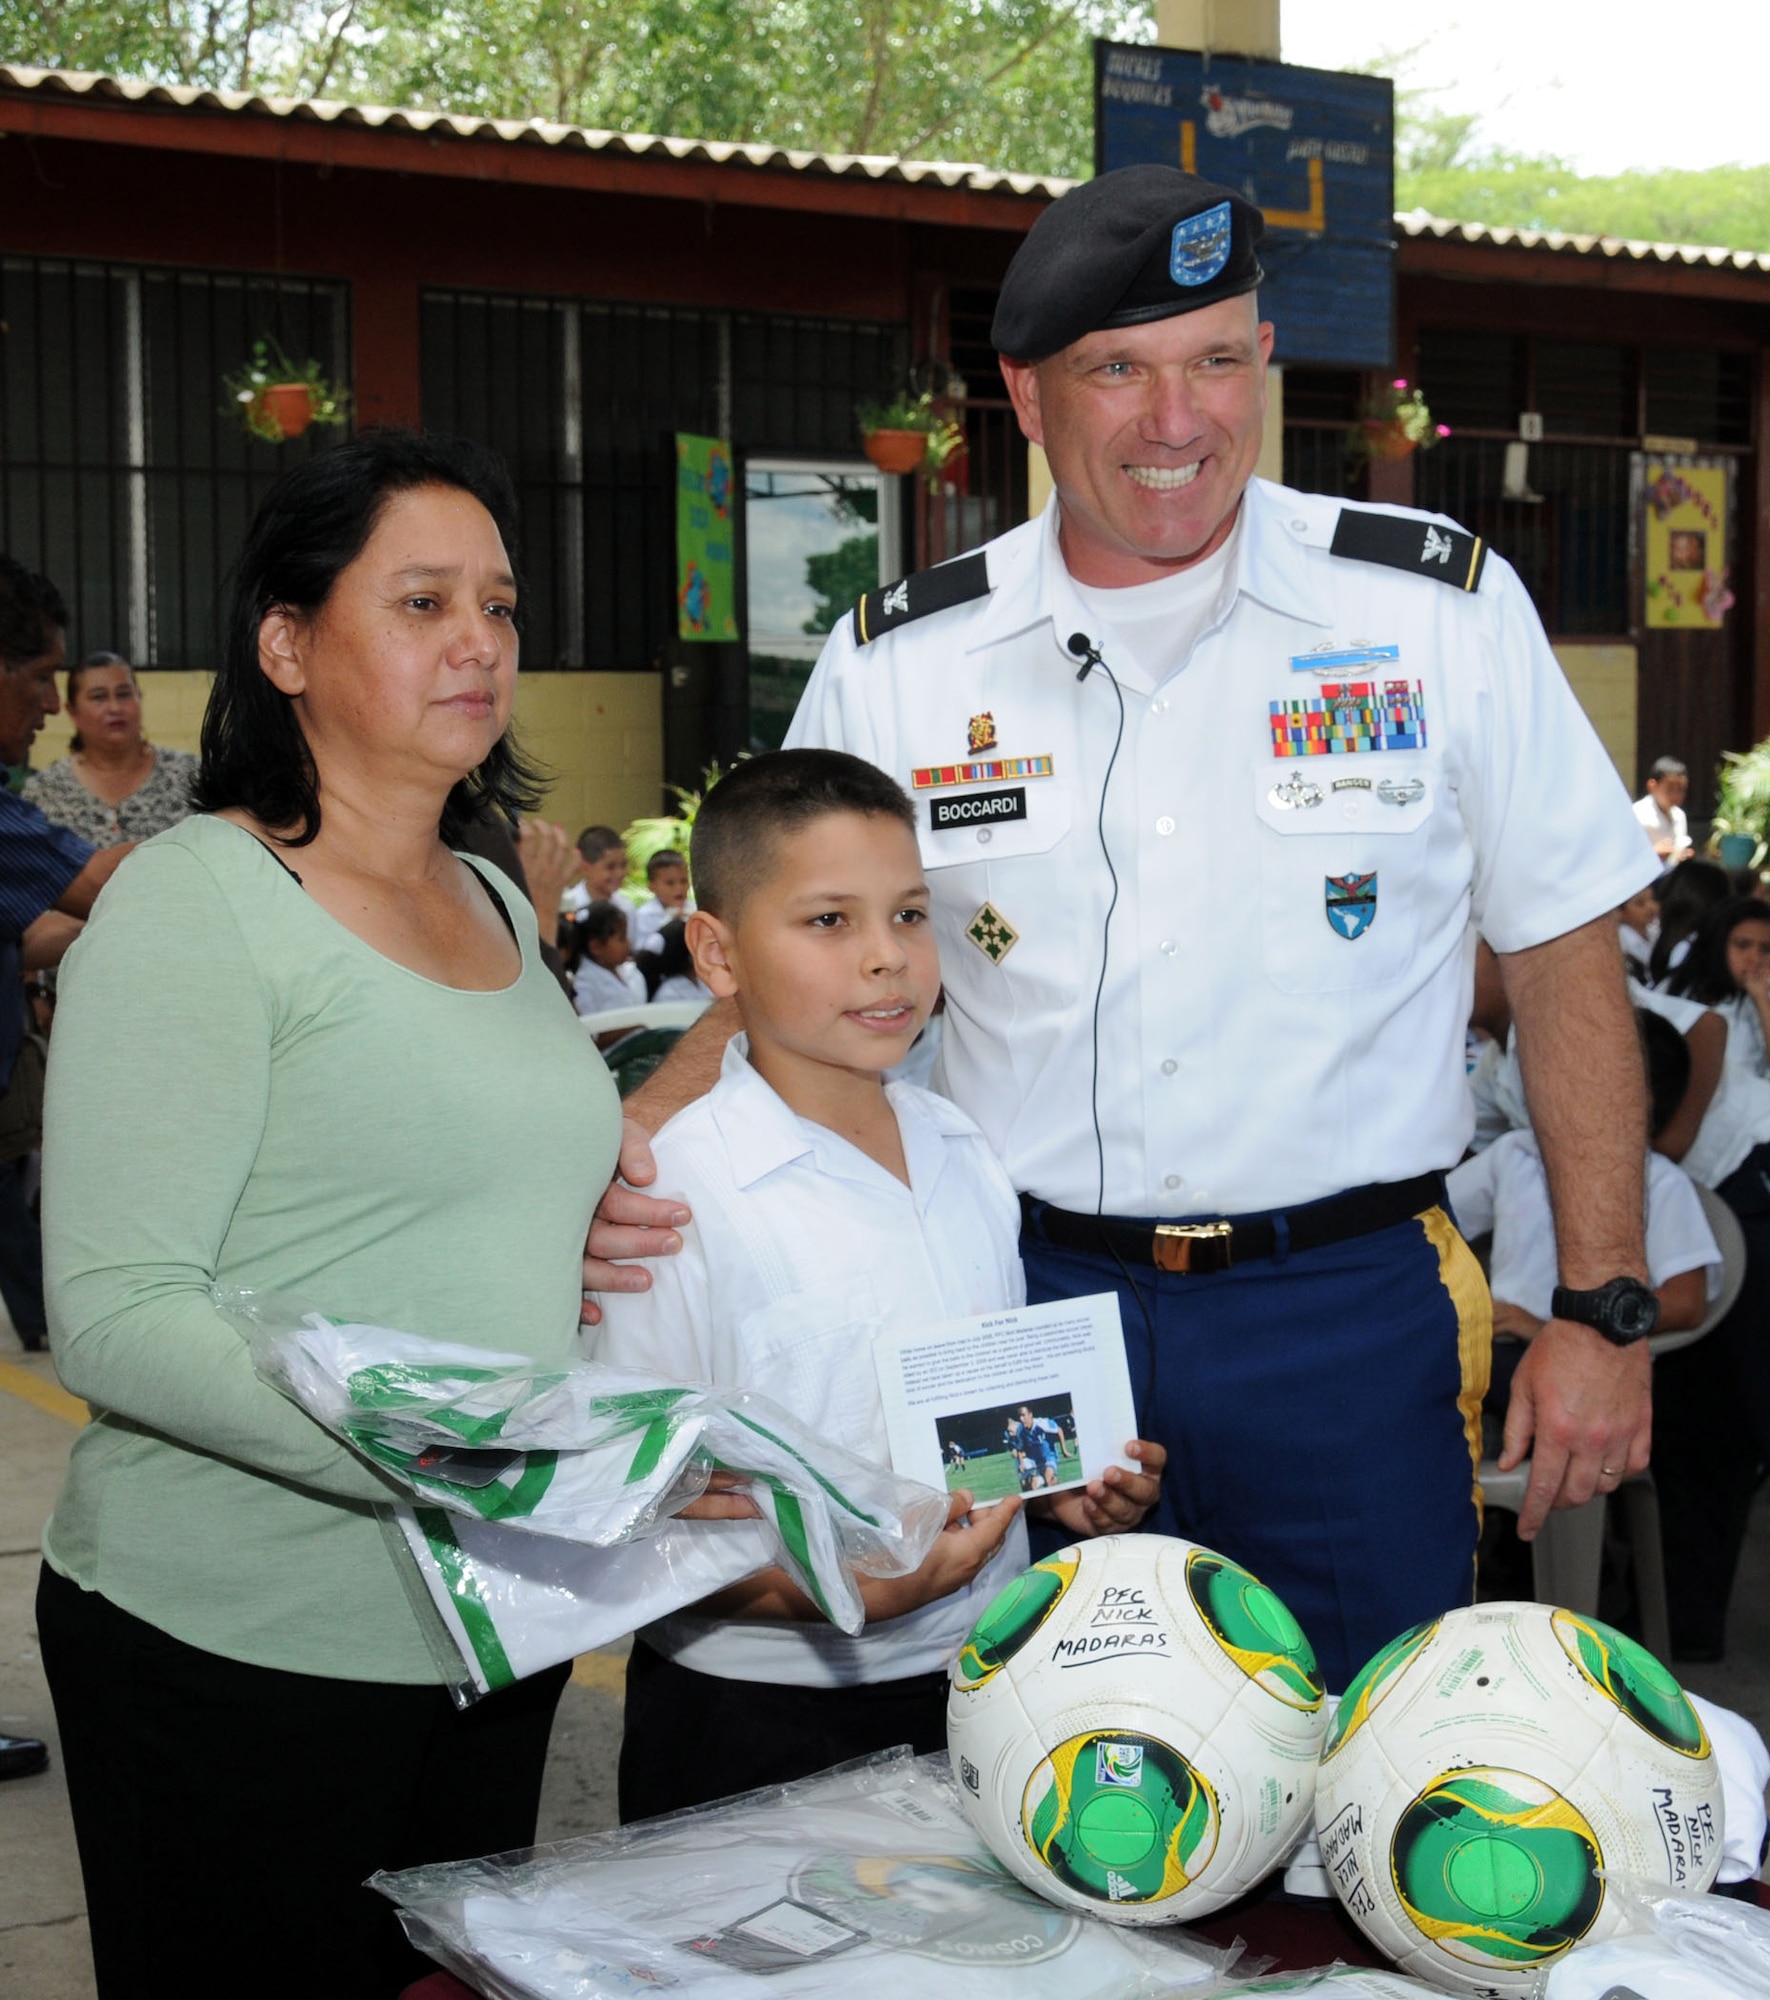 U. S. Army Col. Thomas Boccardi, Joint Task Force-Bravo commander, presents soccer balls and uniforms donated by the Kick For Nick Foundation to Escuela Francia.  Joint Task Force-Bravo, non-government organizations Clean the World, Bridge Ministries and Kick for Nick Foundation, the Honduran 21st Military Police Battalion and the Honduran National Police formed a partnership to distribute soap kits, backpacks with school supplies, tooth brushes and tooth paste, soccer balls and uniforms to students at eight Tegucigalpa, Honduras schools in a two-day event, May 20-21, 2014.  The group handed out over 4,200 soap kits, 600 backpacks, 150 tooth brushes and tooth paste, and 50 soccer balls.  (Photo by U. S. Air National Guard Capt. Steven Stubbs)